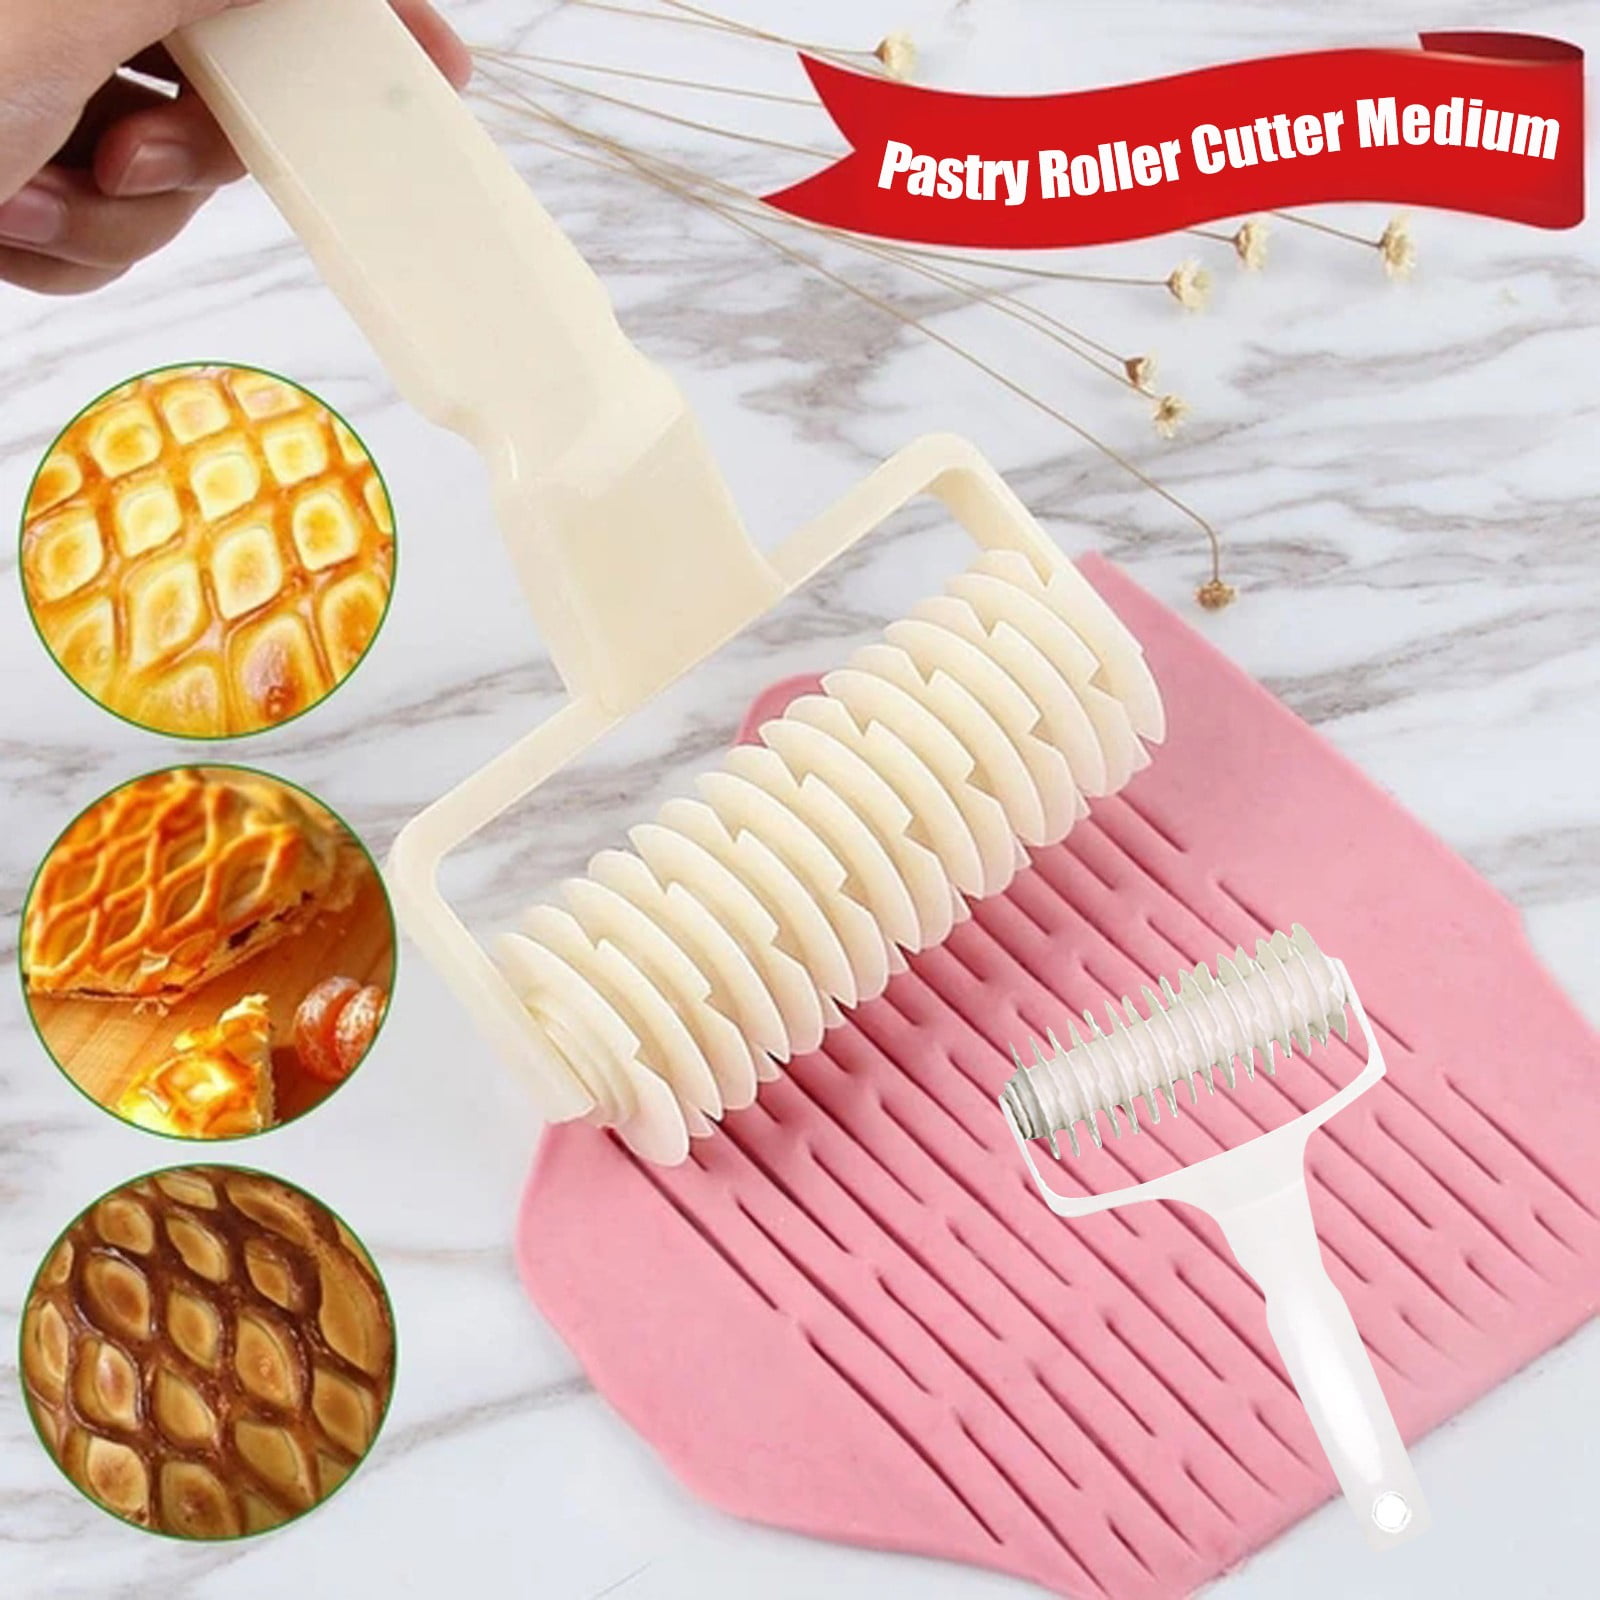 Home Bake Use Baking Pizza Bread Pastry Tool Lattice Roller Cutter Rolling Pin